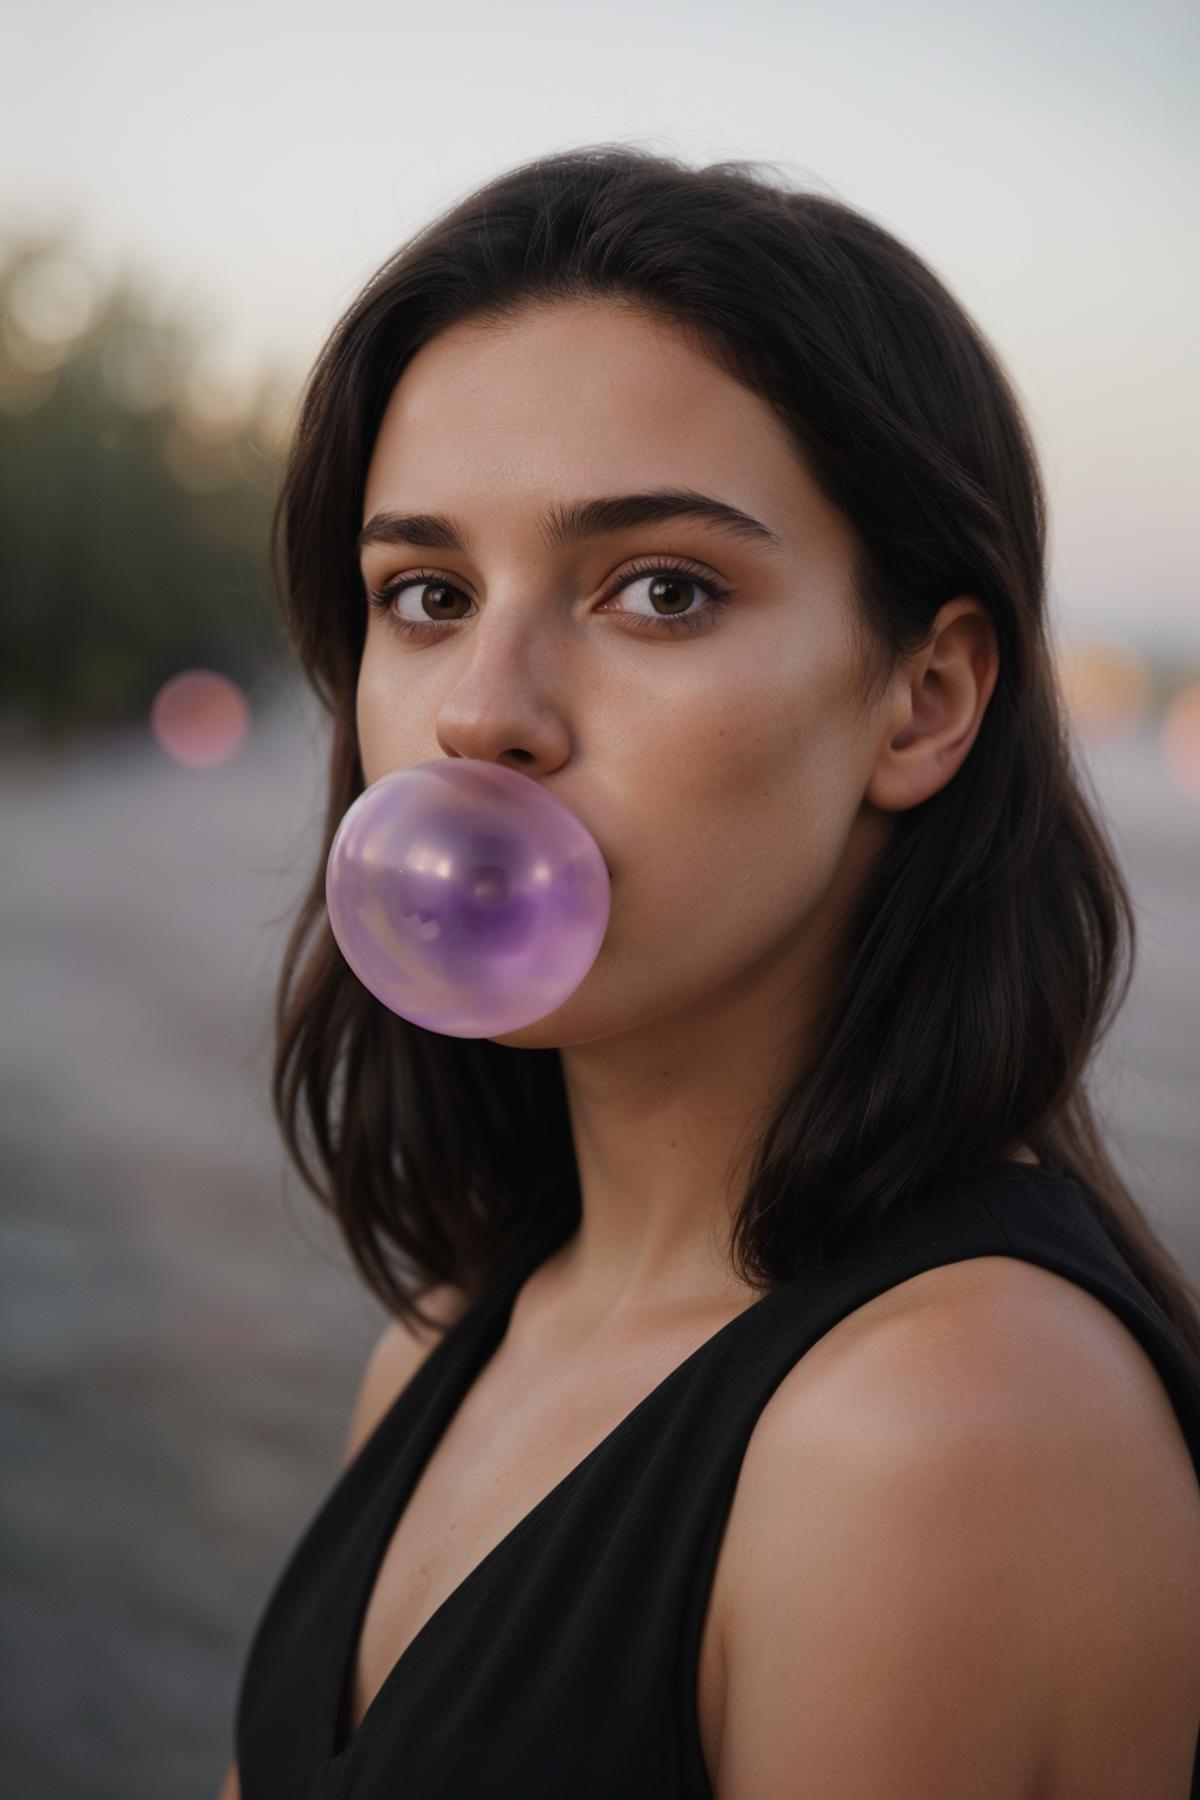 A woman wearing a black shirt and blowing a bubble of gum.